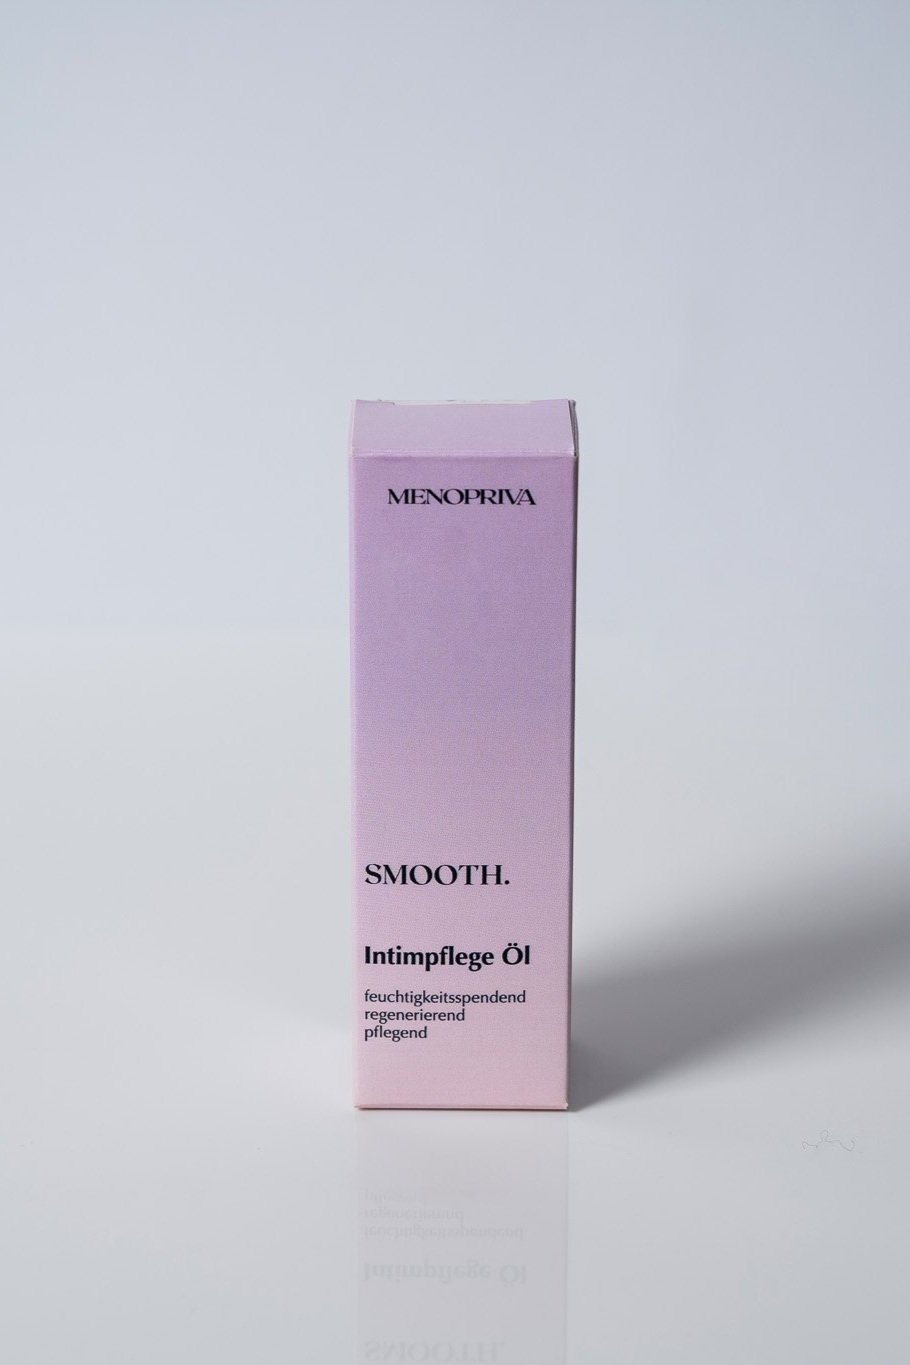 SMOOTH. intimate hygiene oil from Menopriva